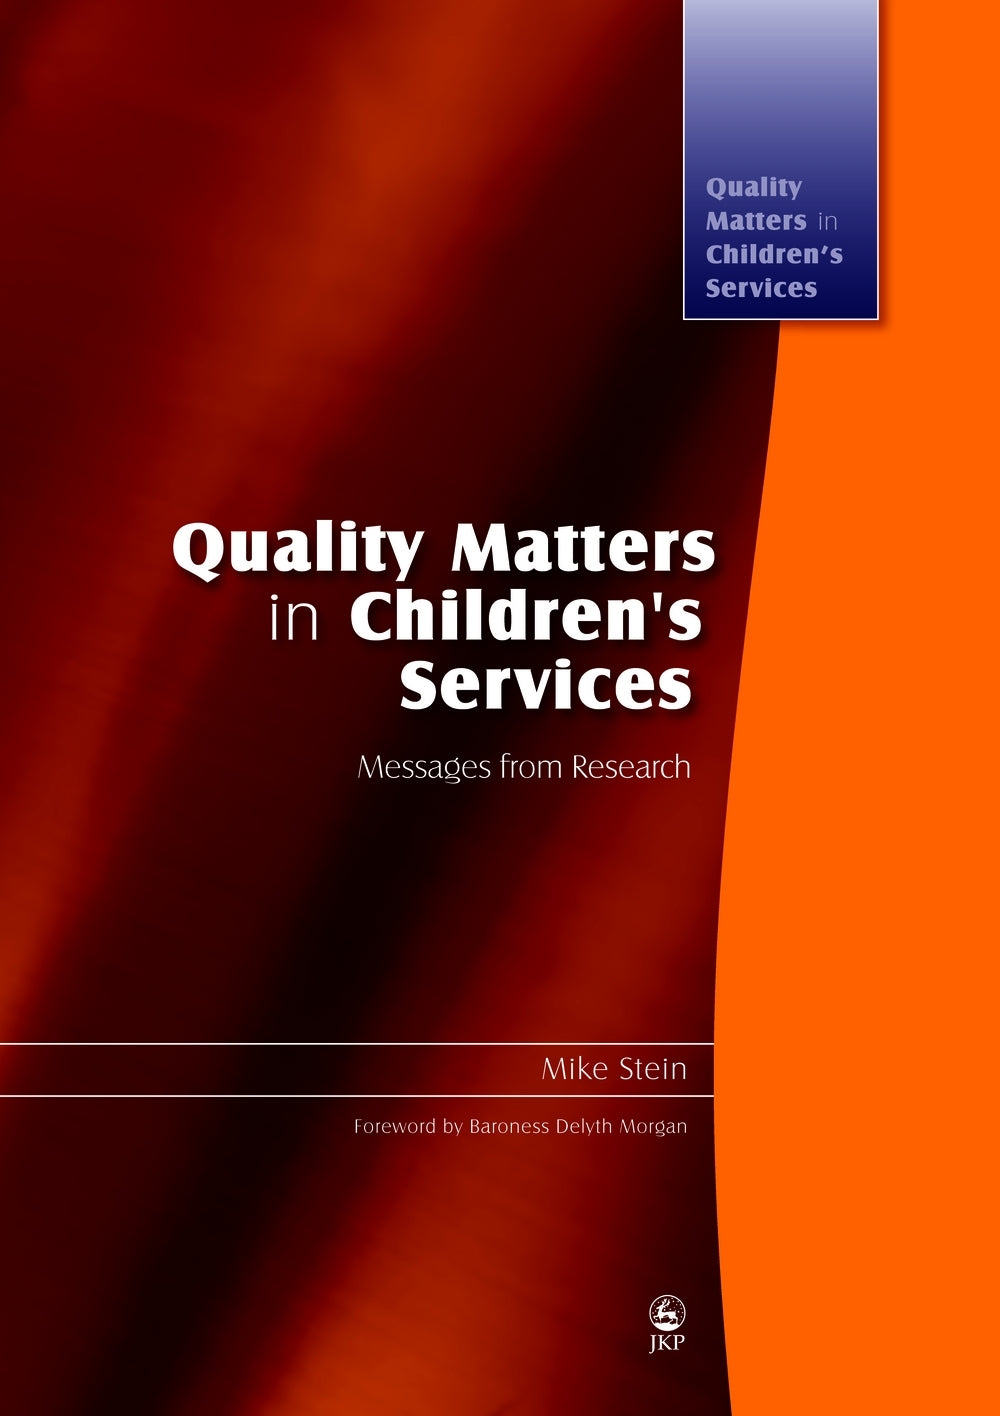 Quality Matters in Children's Services by Mike Stein, Delyth Morgan, Mike Stein